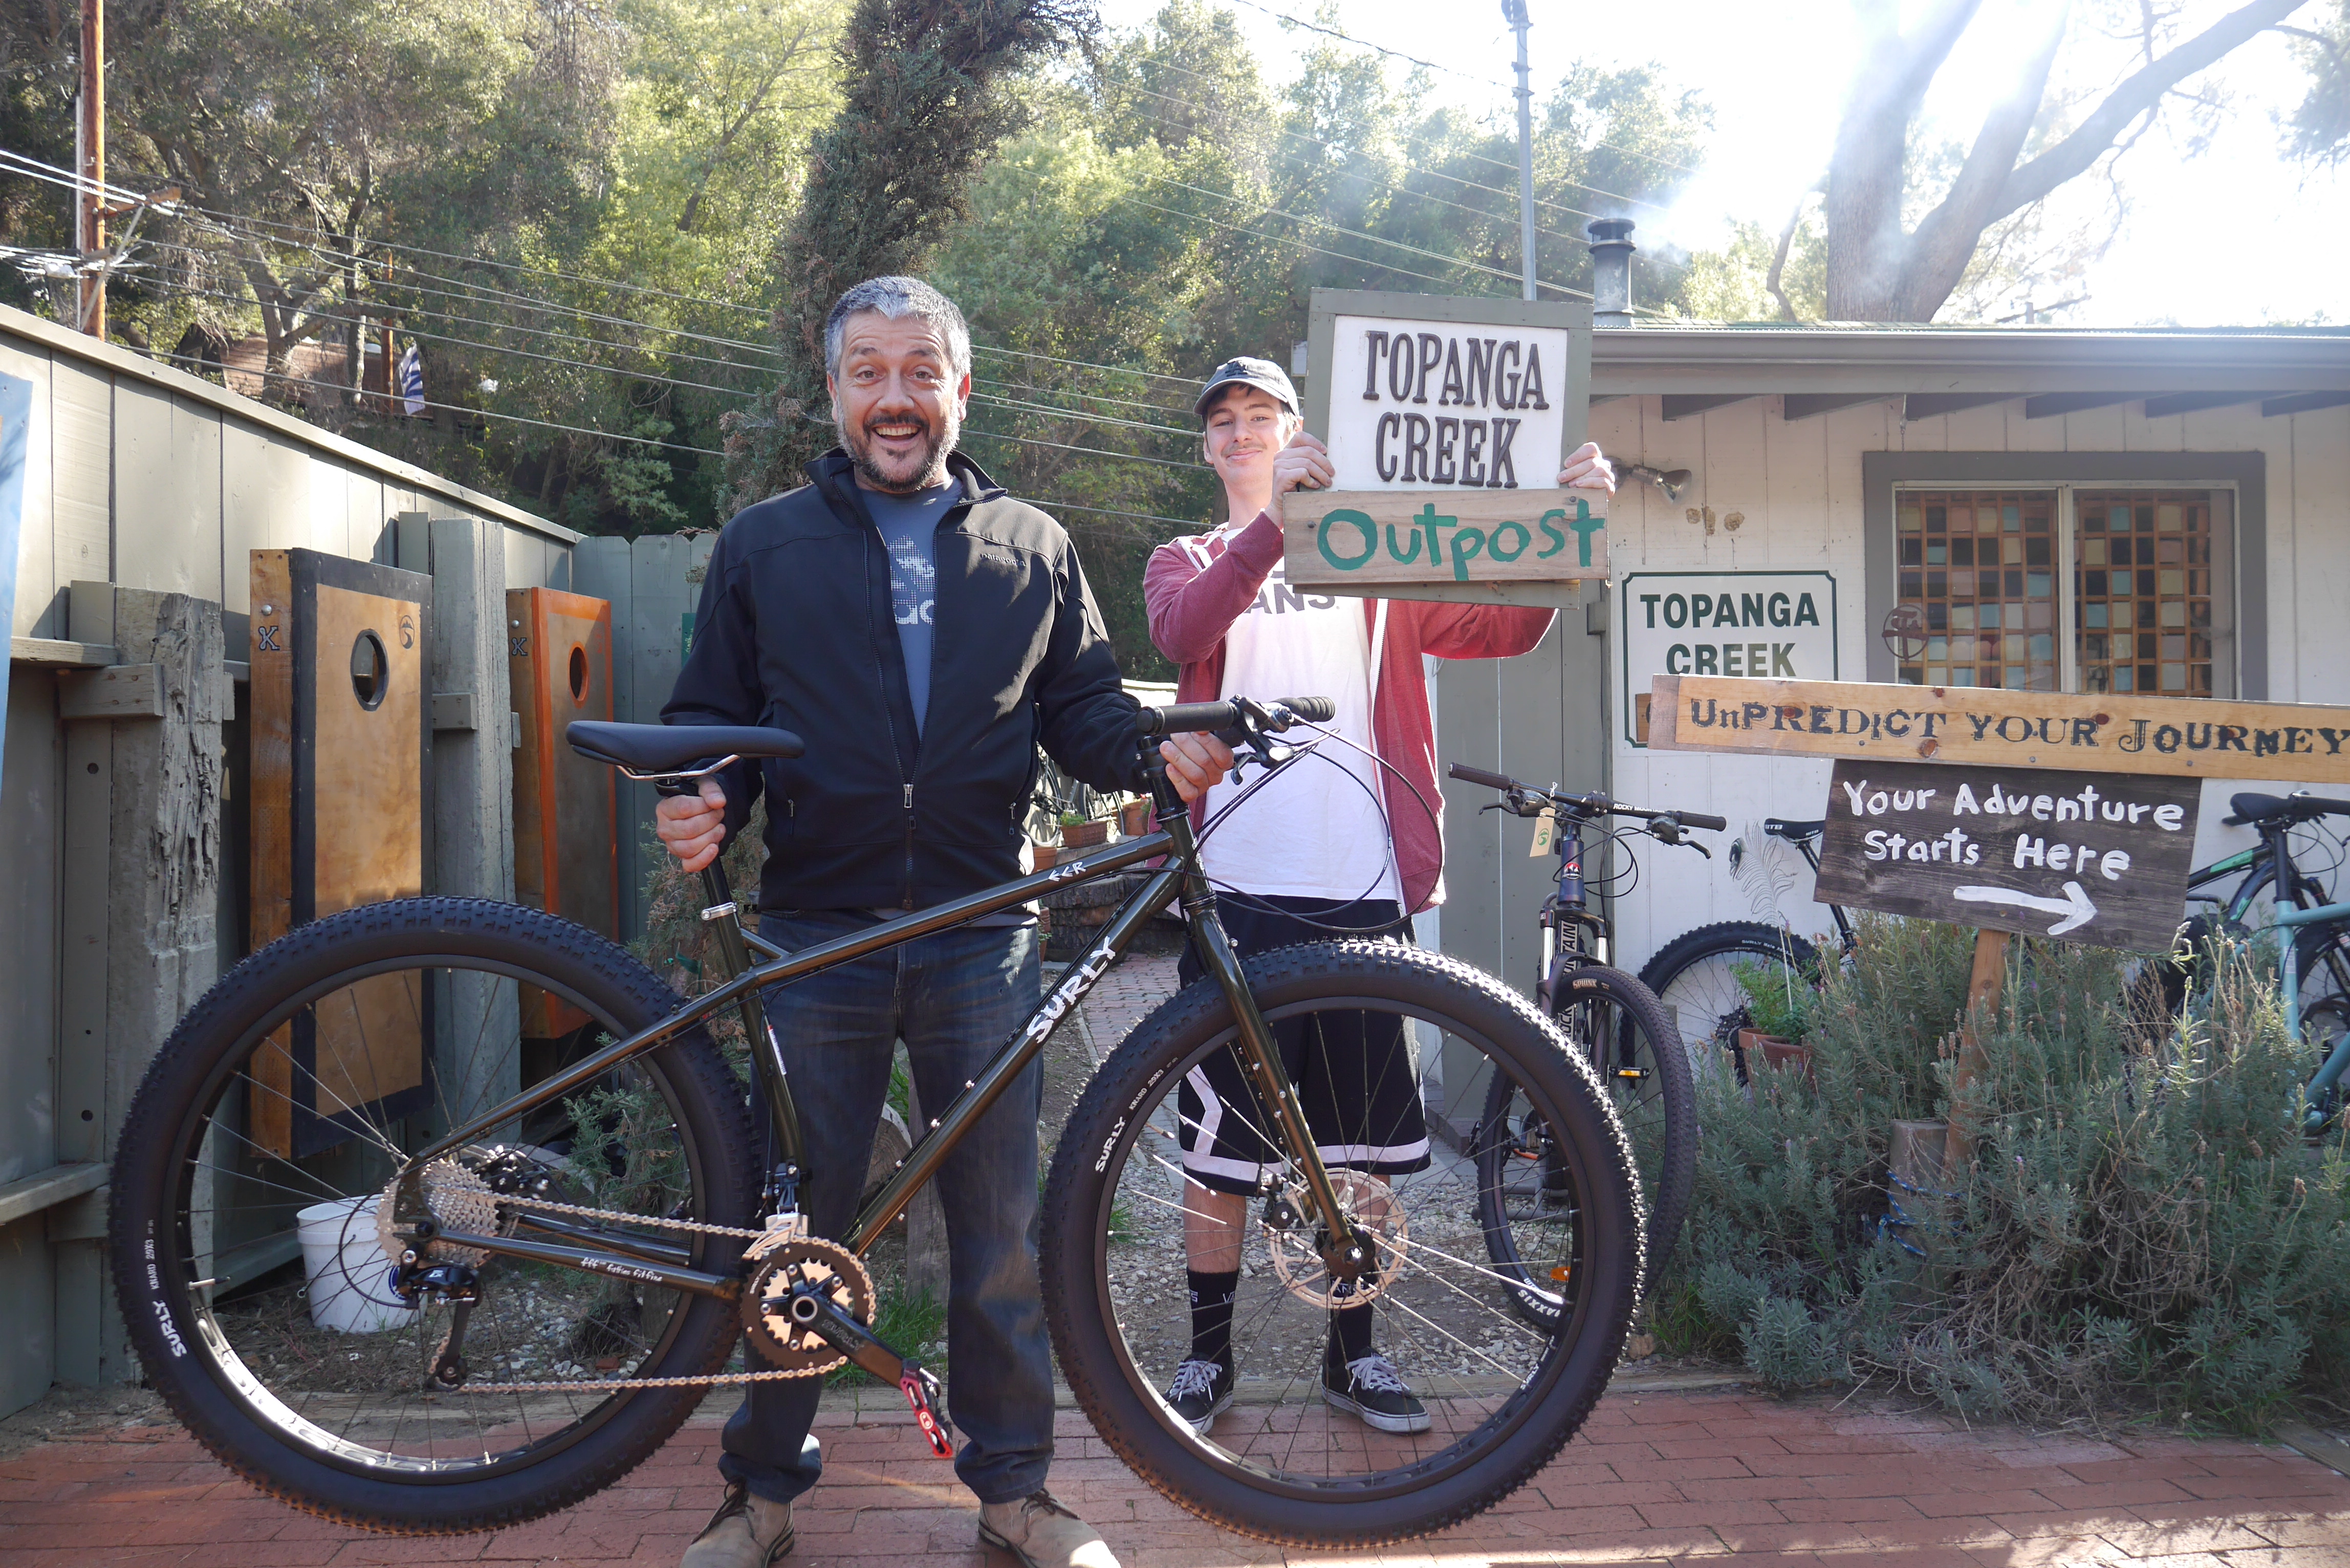 Paolo wanted a fun bike for every terrain and everything.   The Surly ECR is just the right bike.   